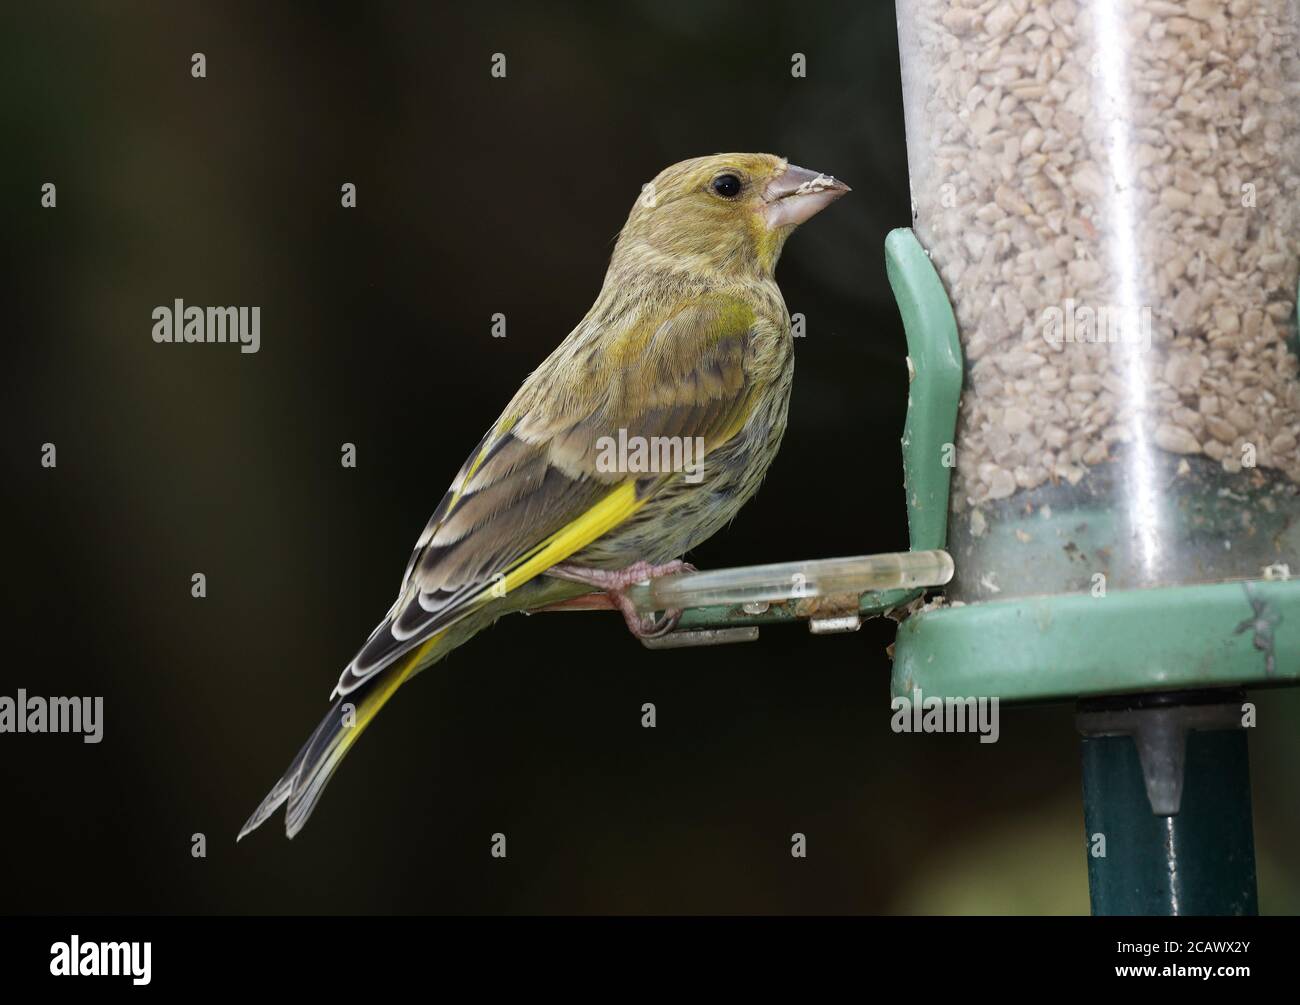 Greenfinch, Carduelis chloride, at a garden feeder, Mid Wales, uk Stock Photo